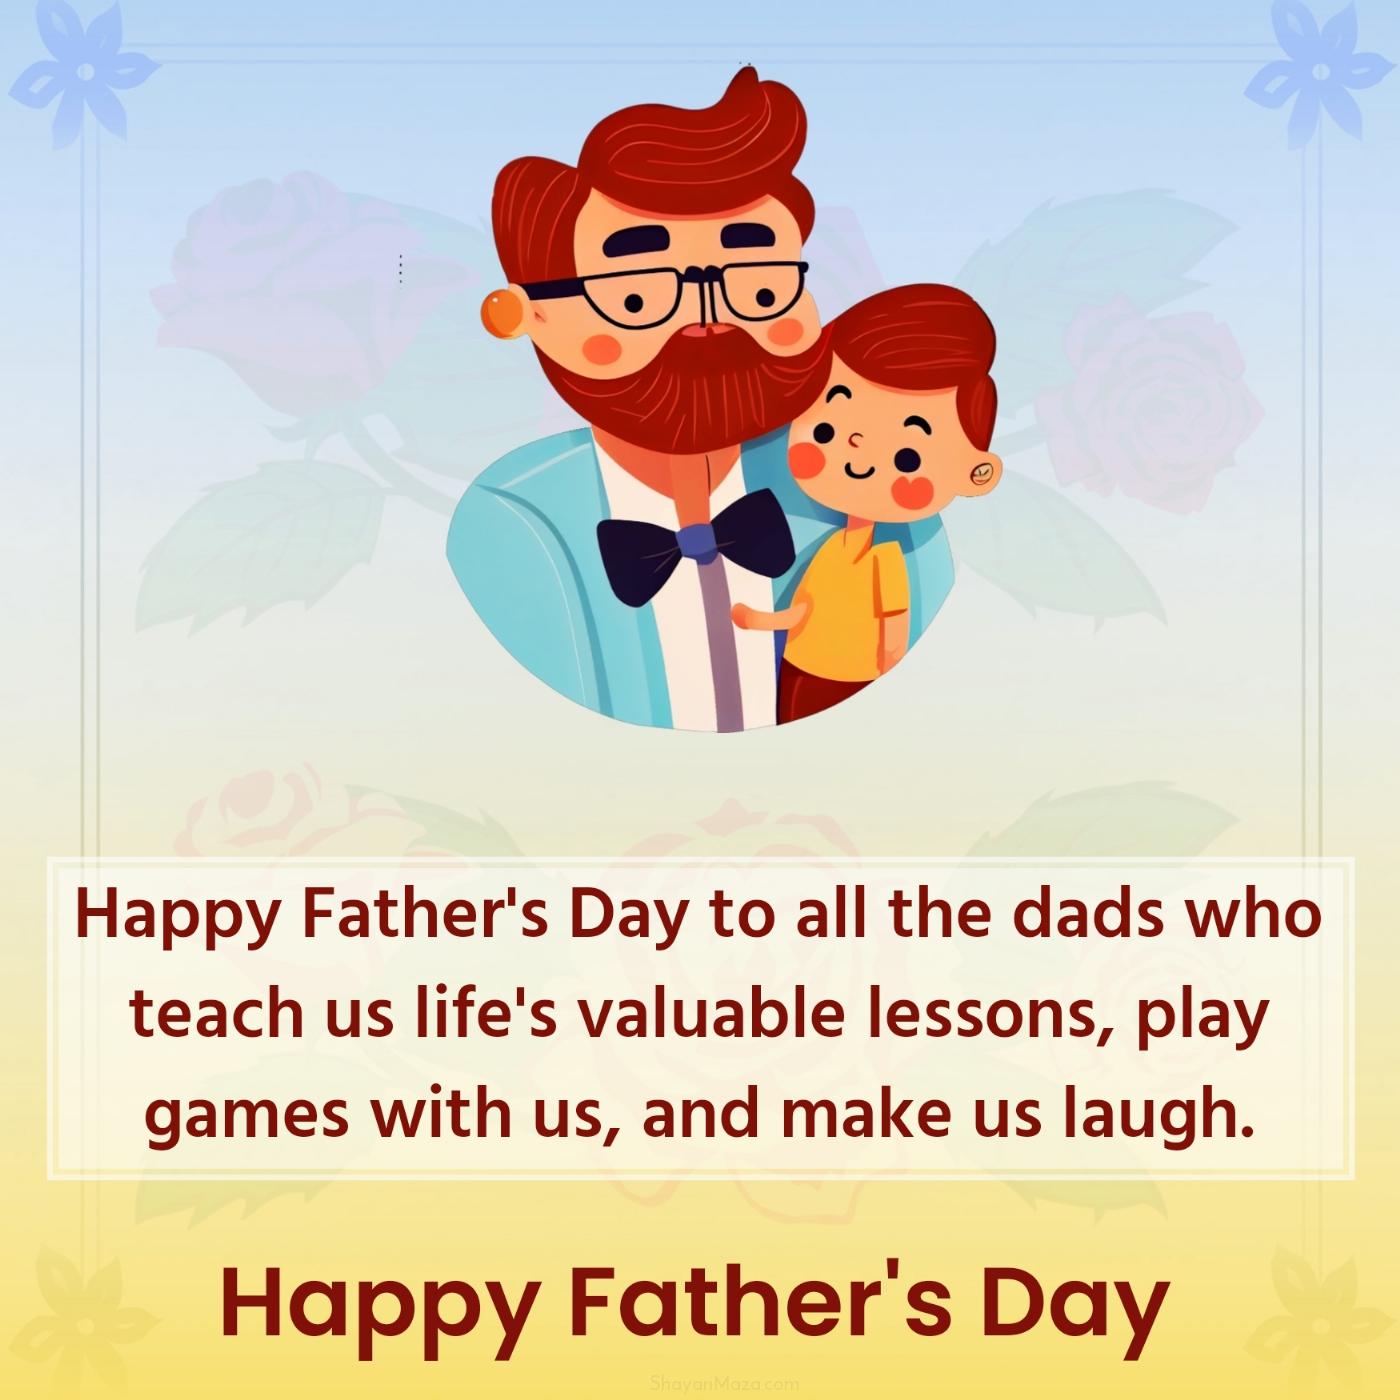 Happy Father's Day to all the dads who teach us life's valuable lessons